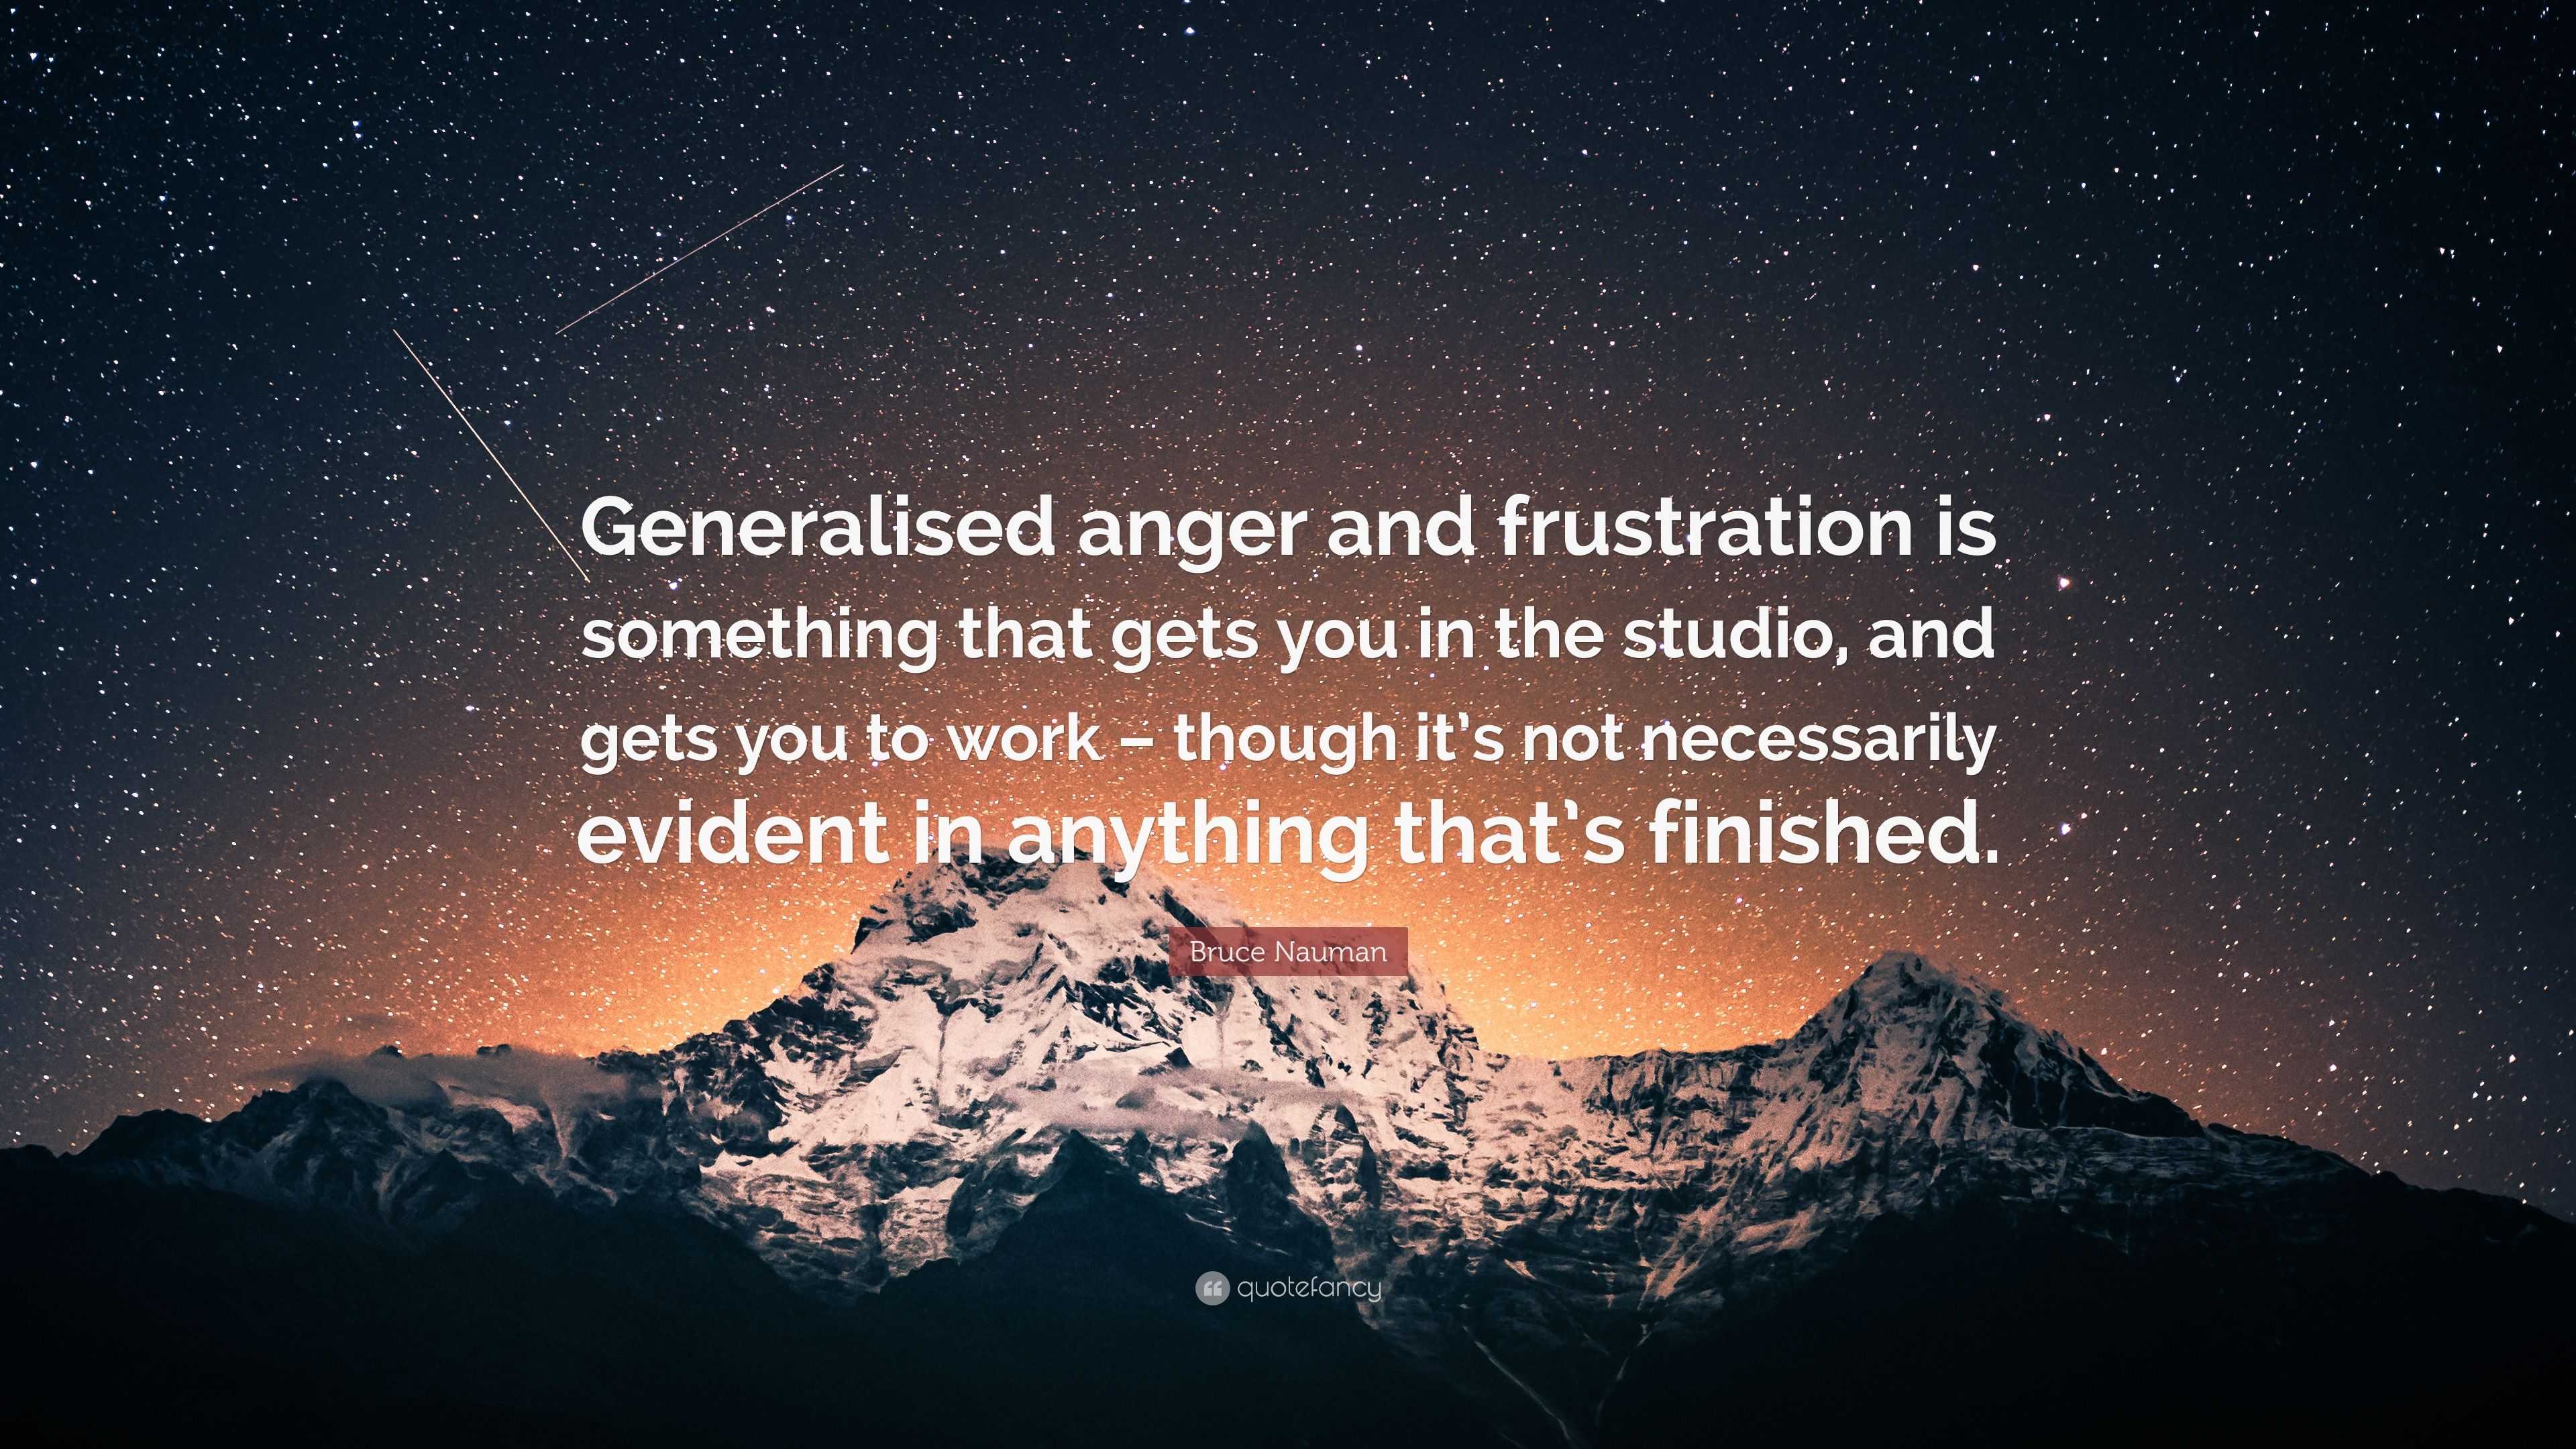 Bruce Nauman Quote: “Generalised anger and frustration is something